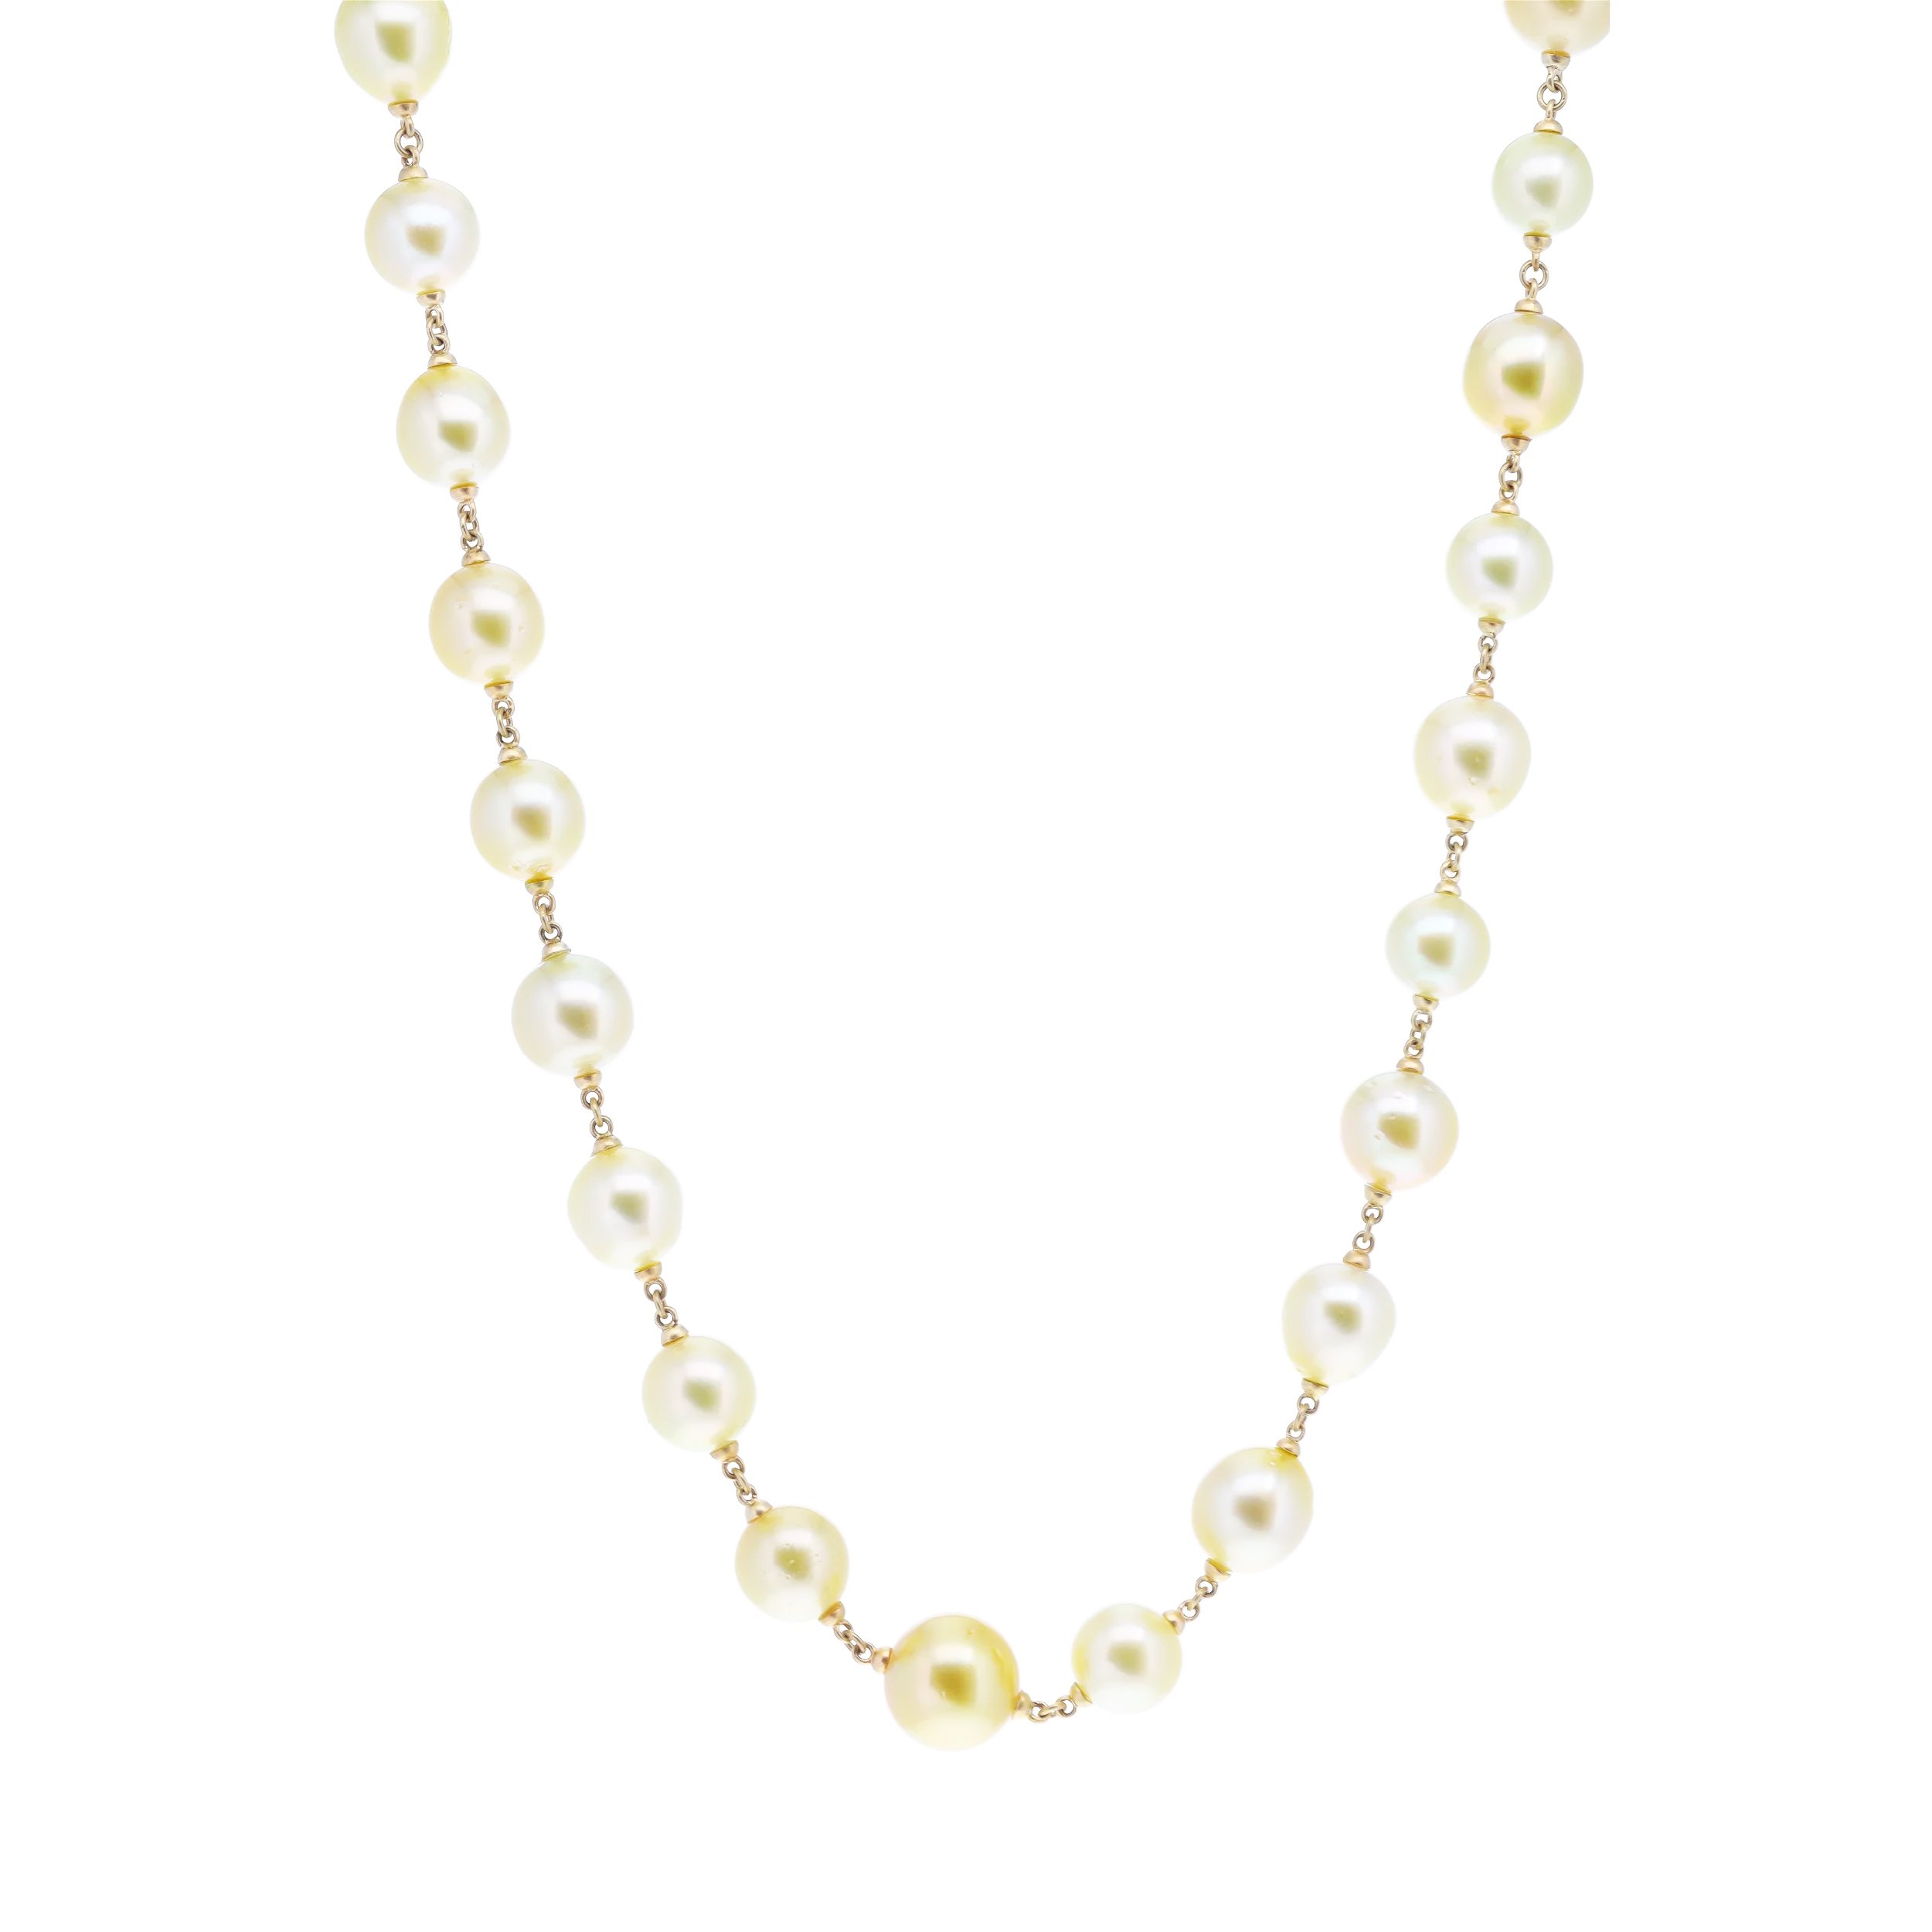 30" Yellow South Sea Pearl Necklace